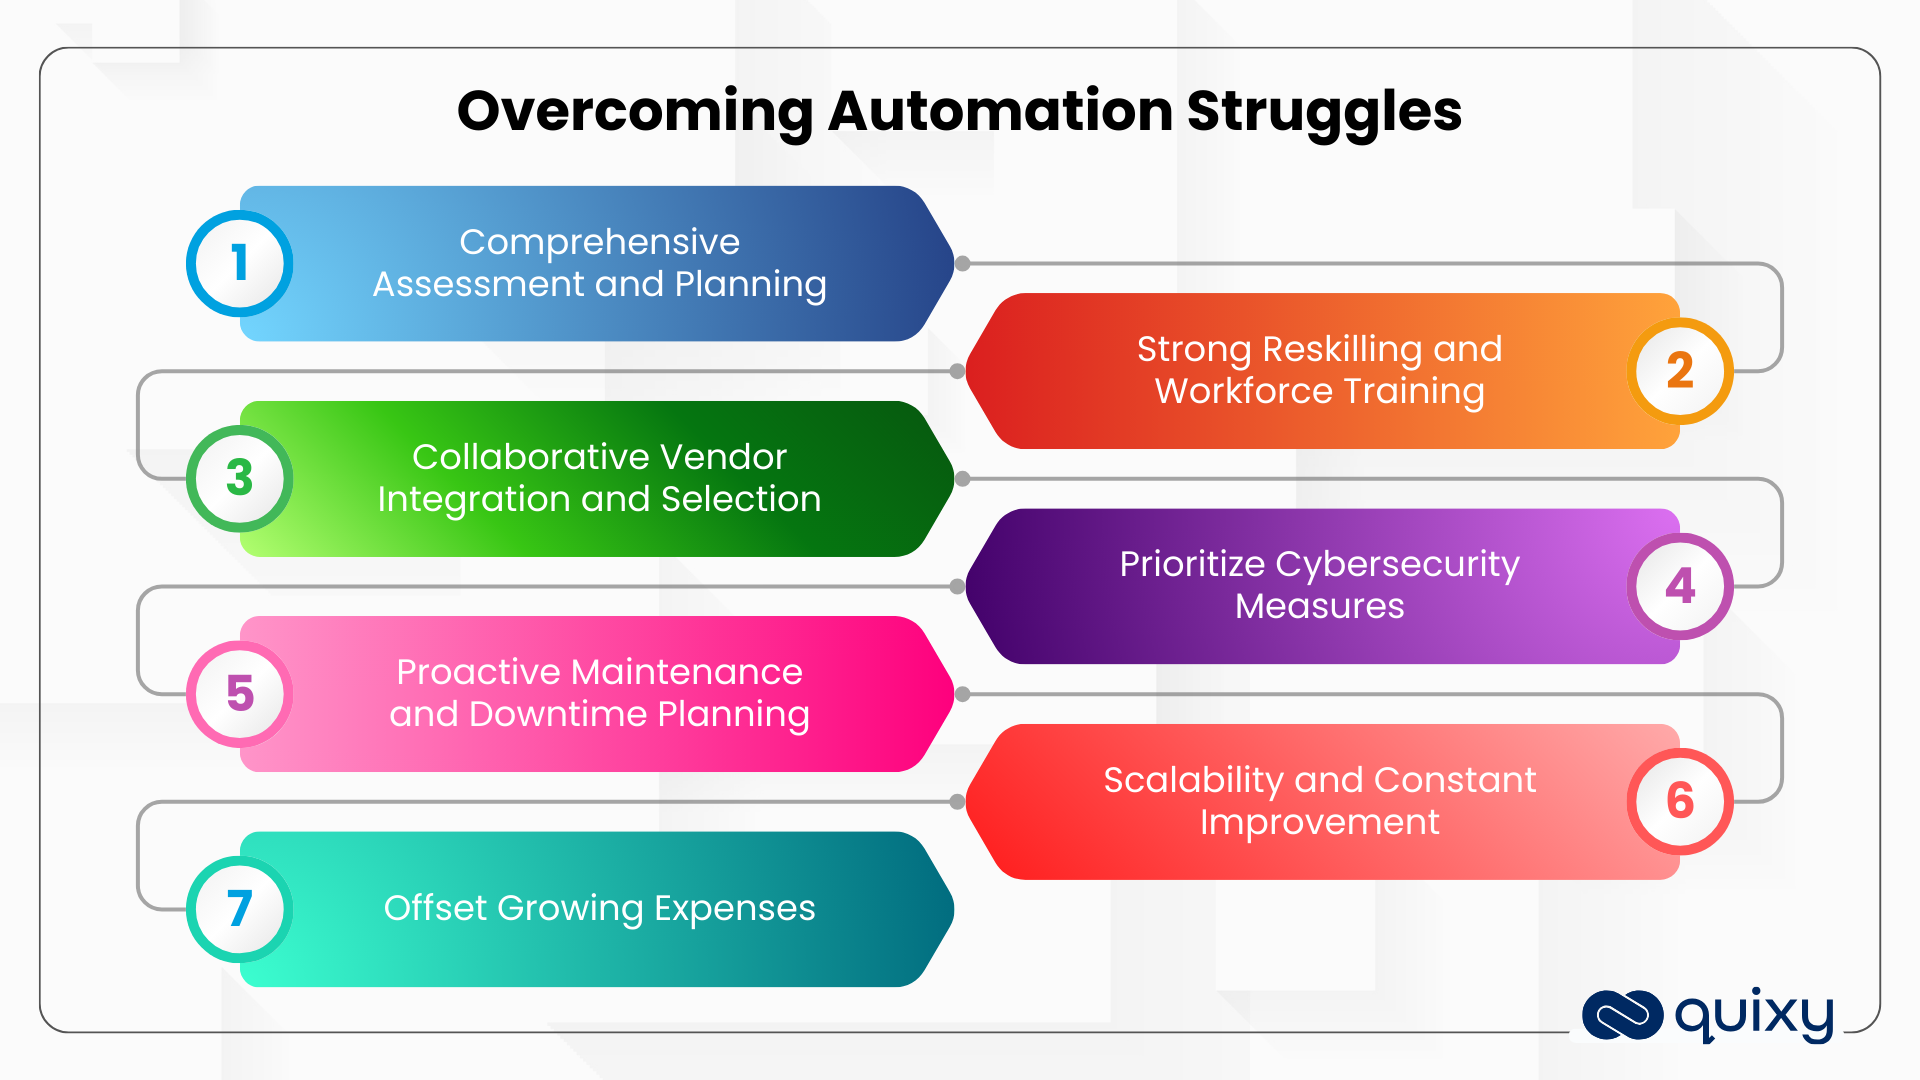 Overcoming Automation challenges